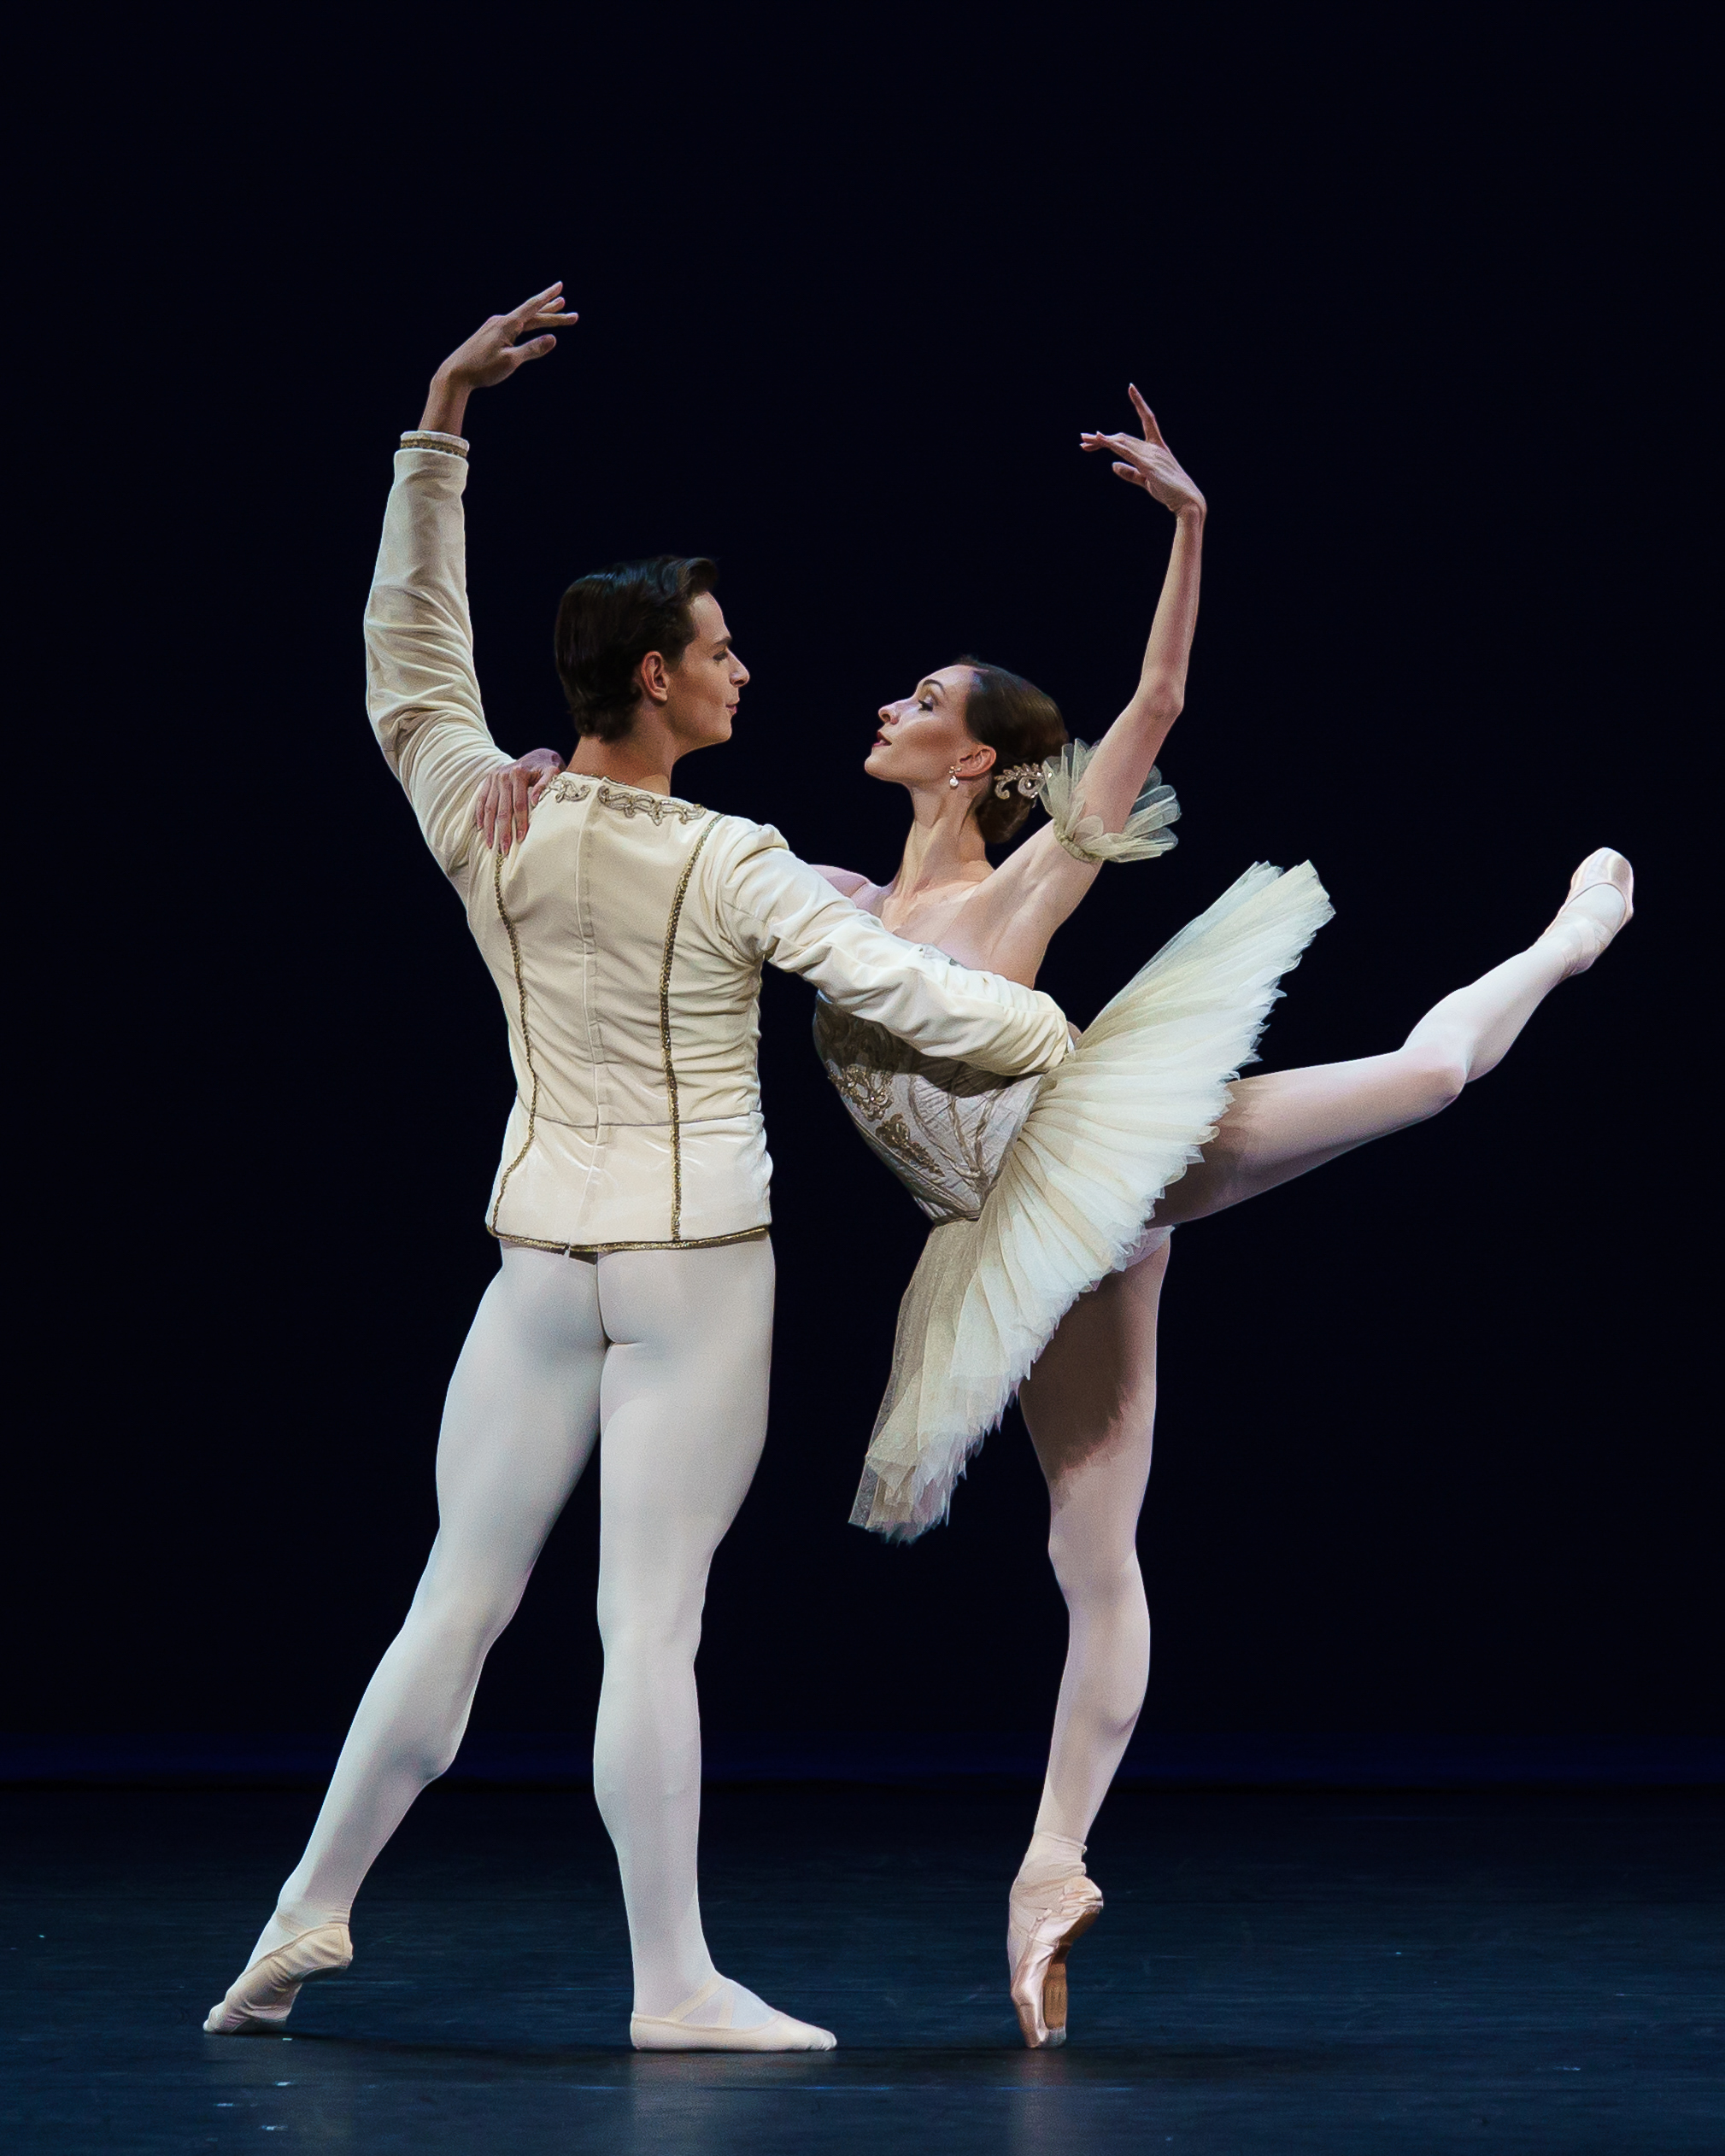 A man and a woman perform the 0 pas de deux onstage, wearing cream and gold bejeweled costumes in the classical ballet style.